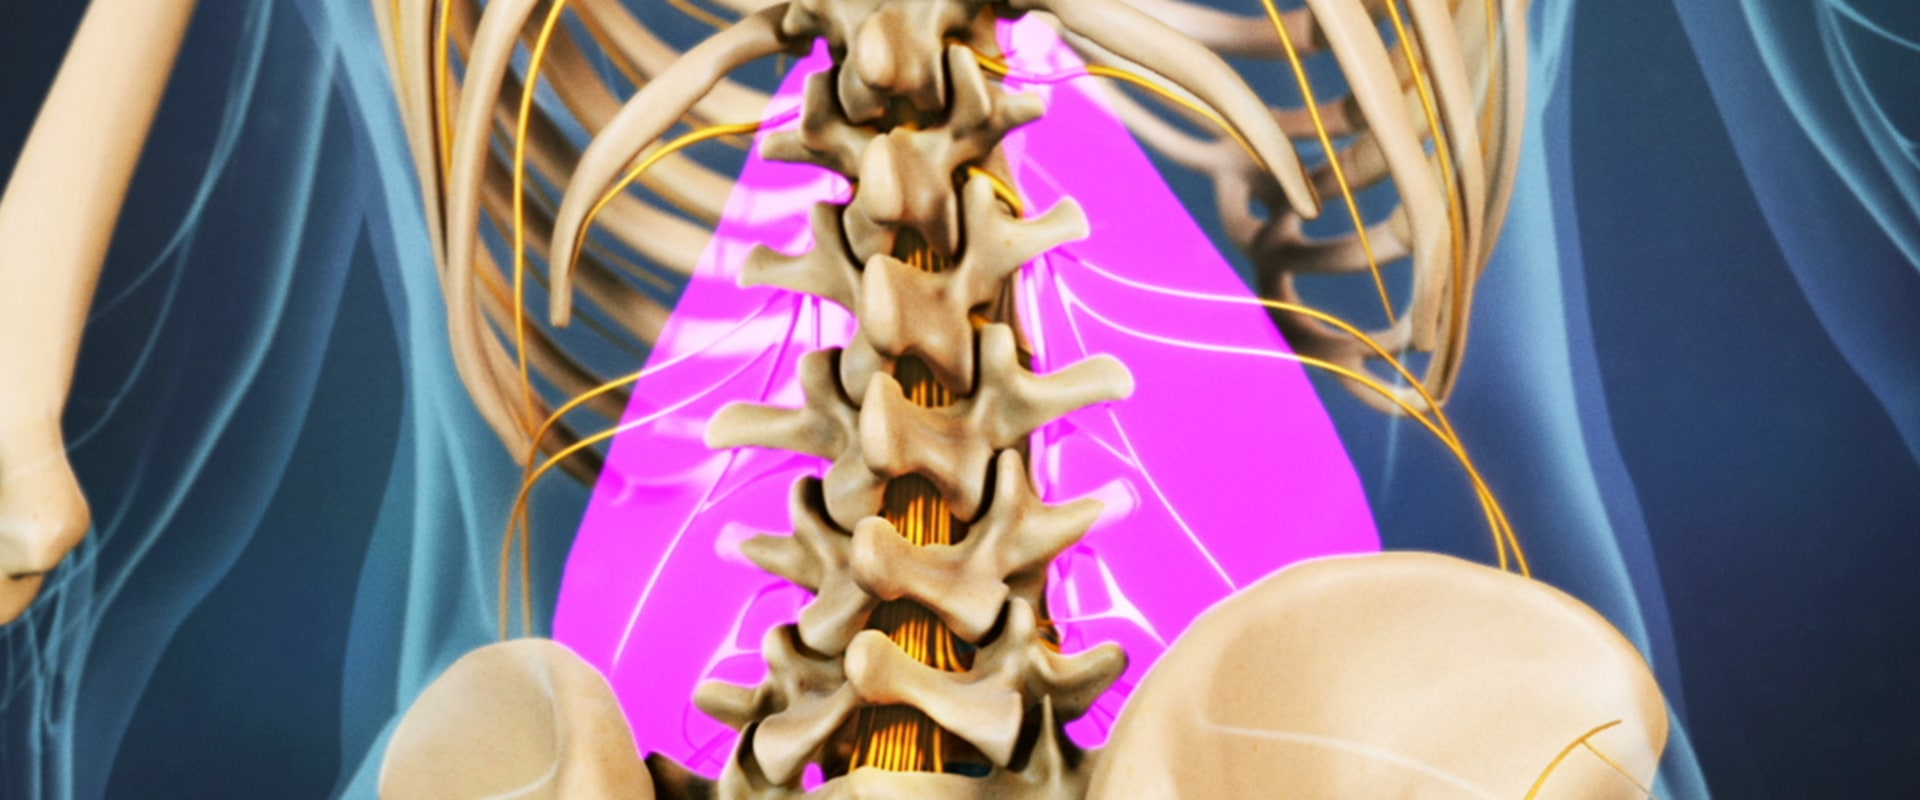 Why back pain occurs?